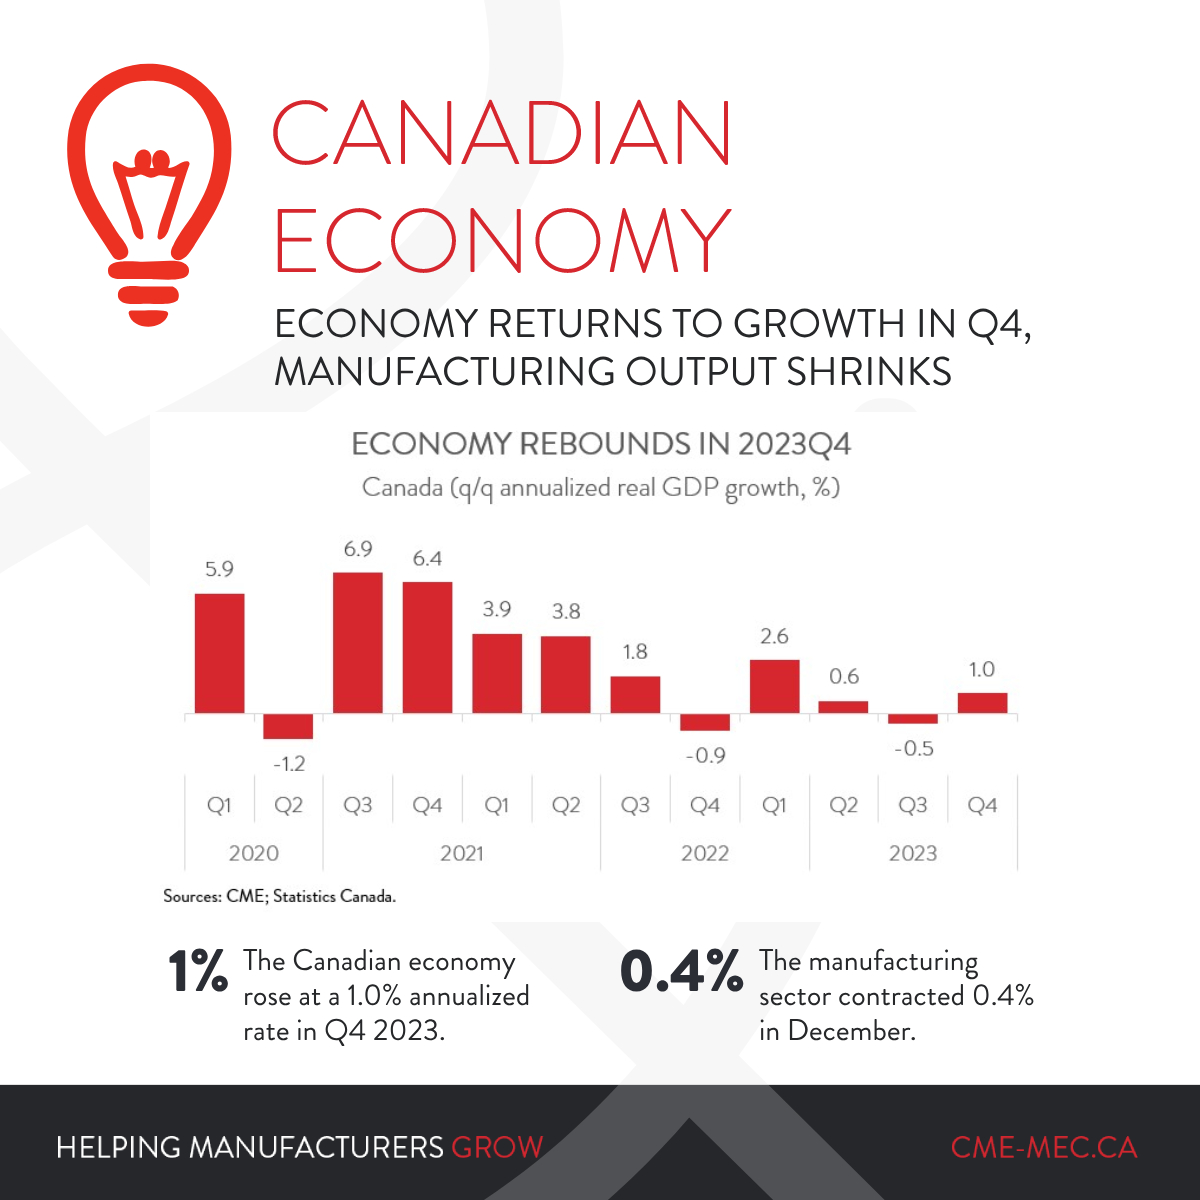 The Canadian economy rose at a 1.0% annualized rate in Q4 2023, avoiding falling into a technical recession. However, the manufacturing sector contracted 0.4% in December. Learn more here: cme-mec.ca/representation… #cdnecon #q42023 #manufacturing #gdpgrowth #economy